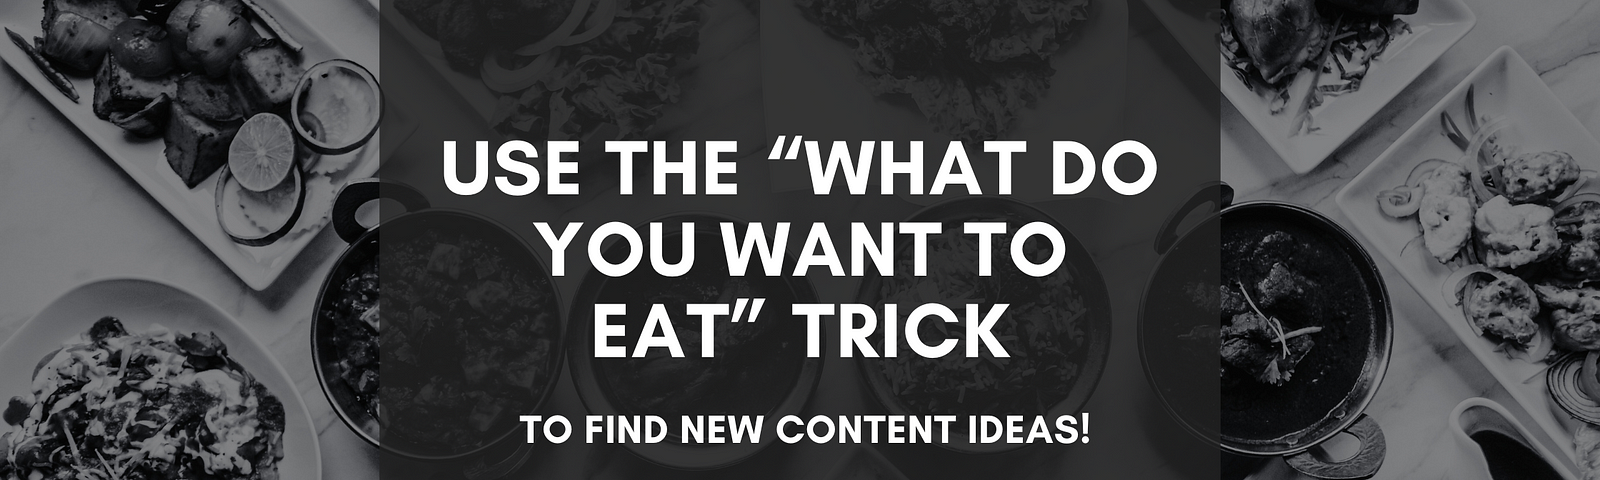 Use the “What Do You Want To Eat” Trick to Find New Content Ideas